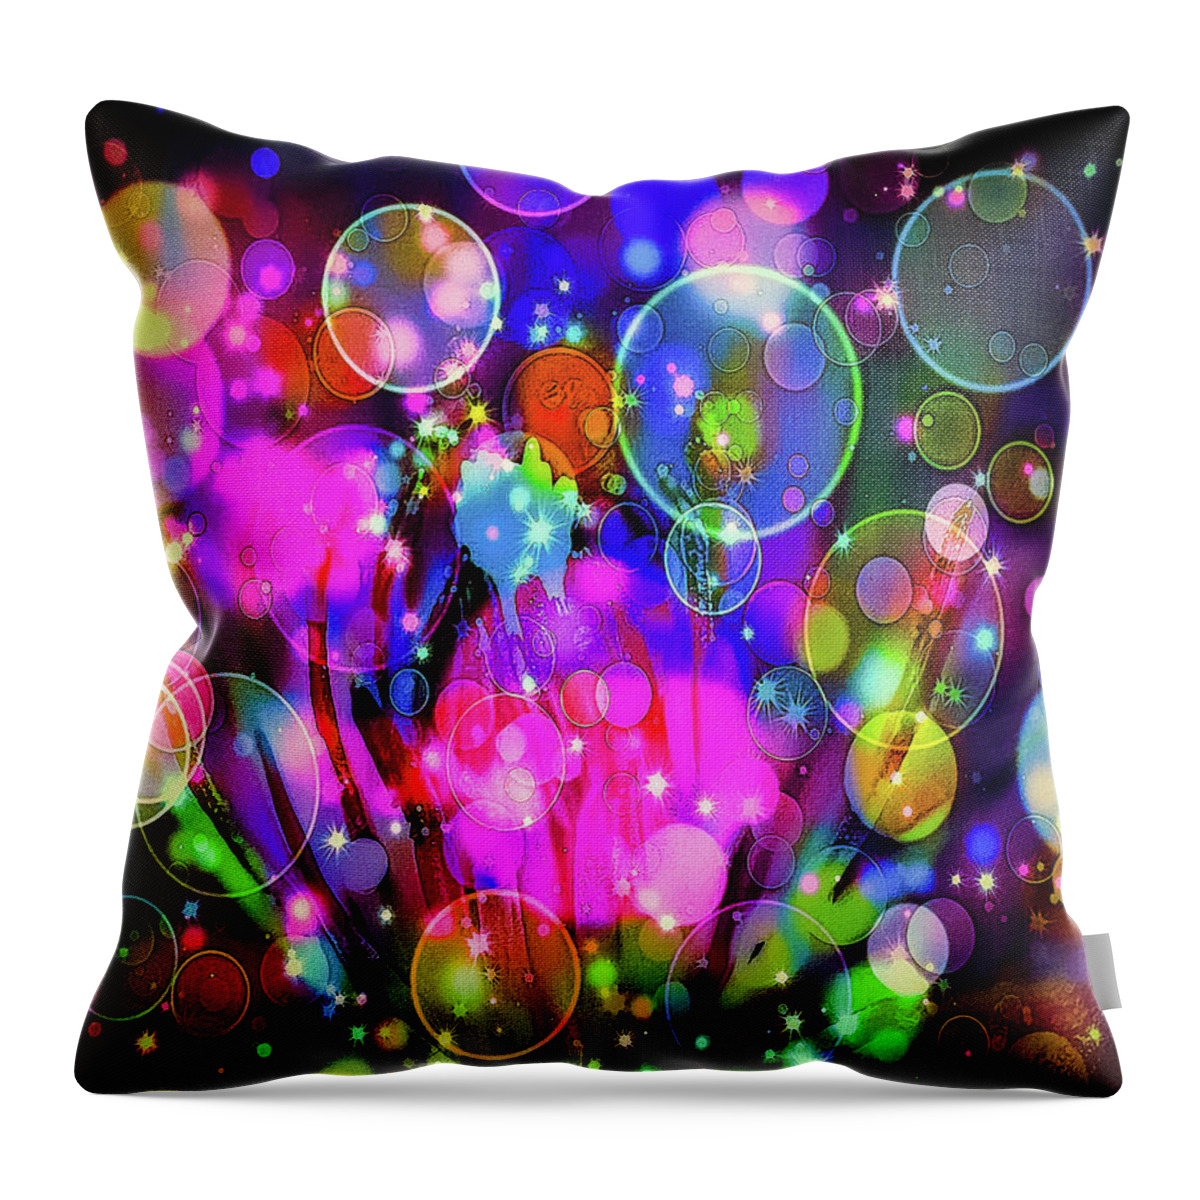 Party Time Throw Pillow featuring the mixed media Party Time by Don Wright